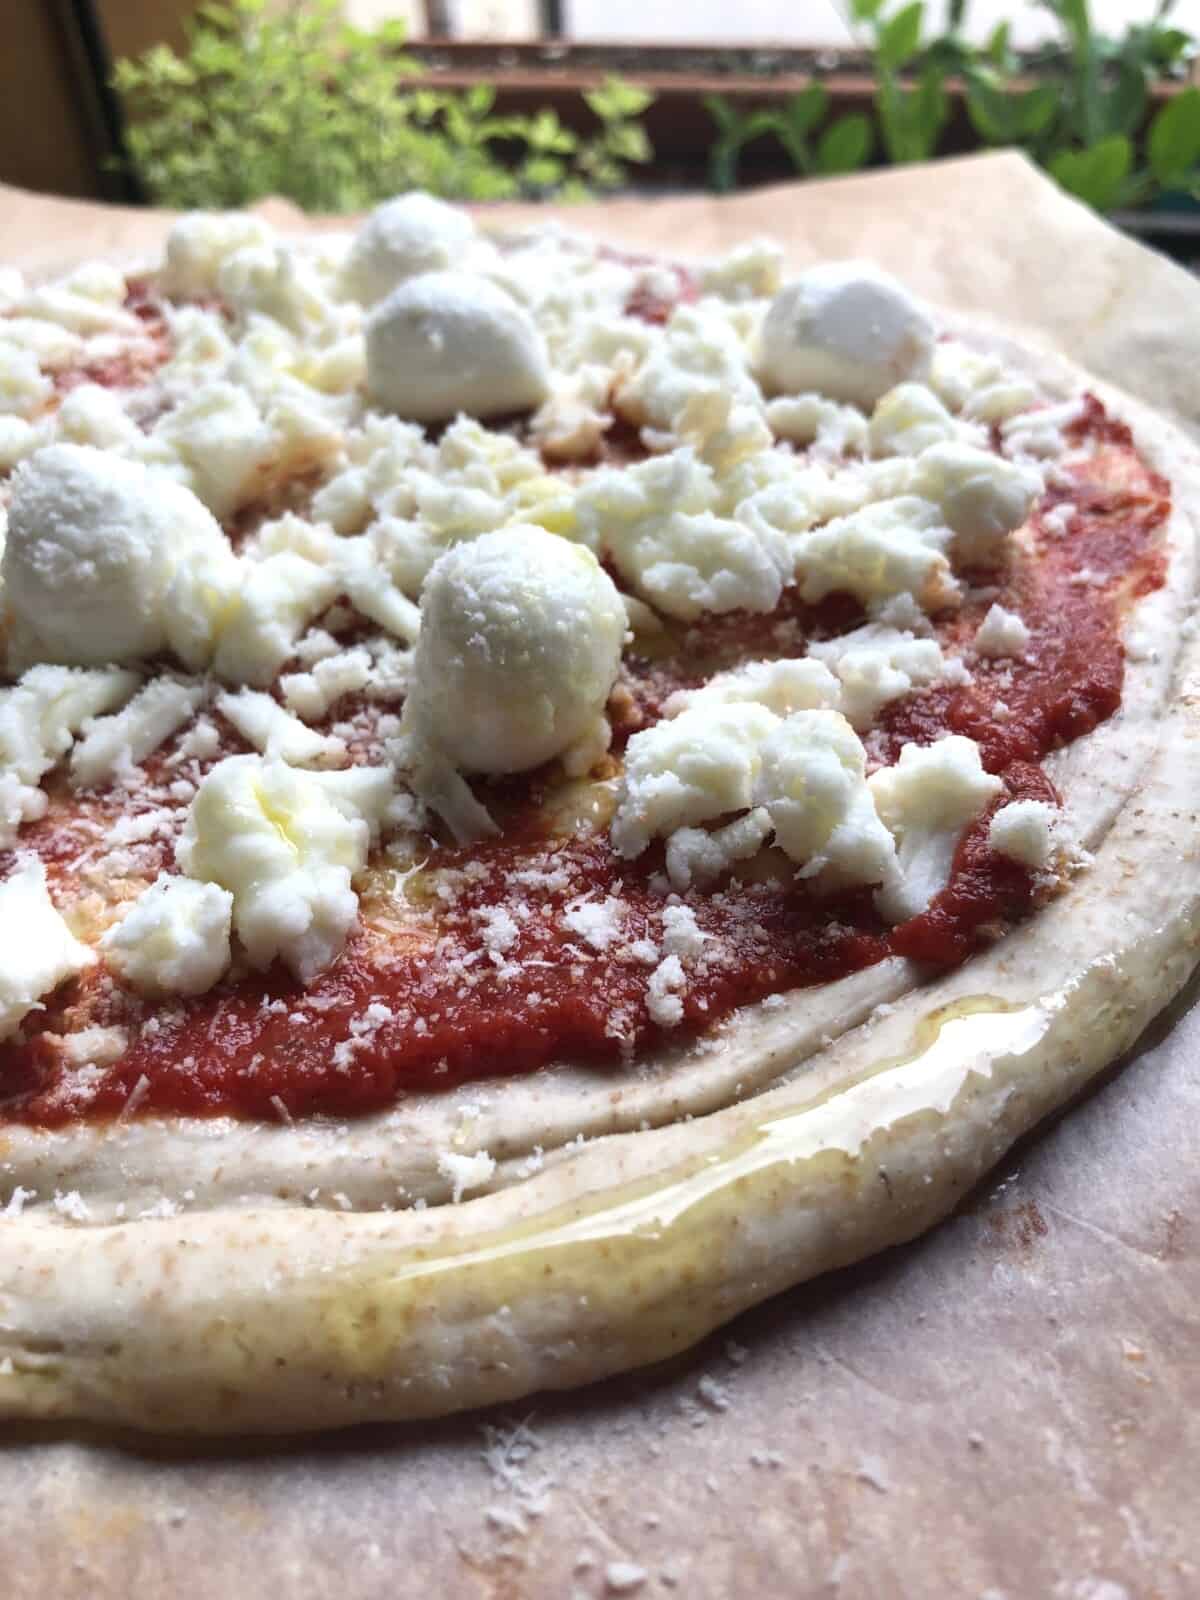 A delicious unbaked assembled whole wheat pizza with easy pizza sauce,fresh mini mozzarella balls, and freshly shredded mozzarella cheese.